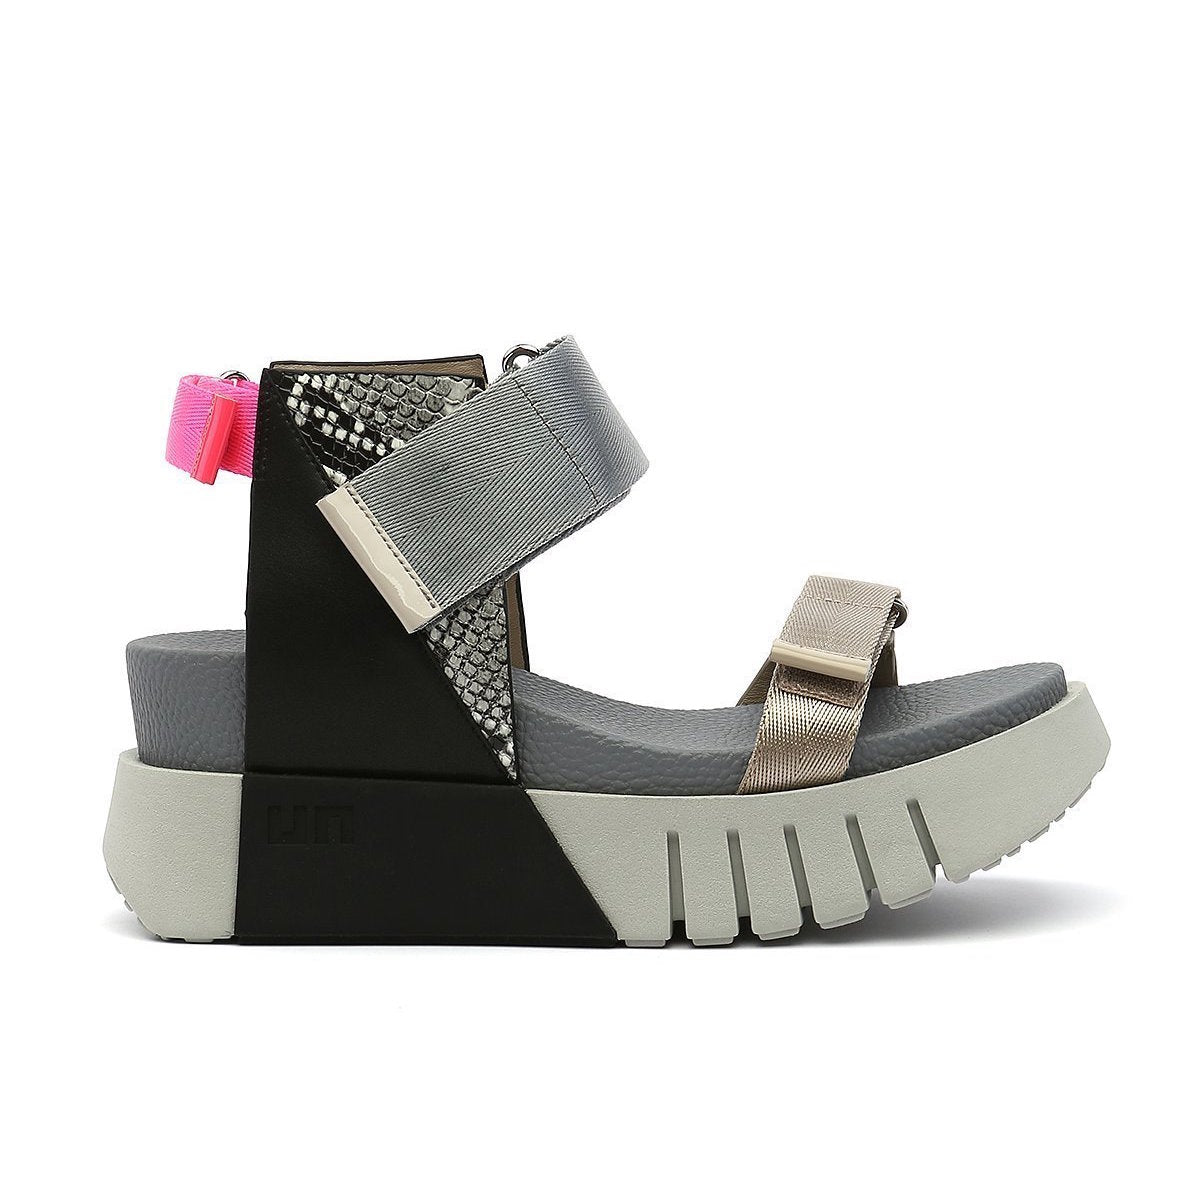 Outer view of the united nude delta run sandal. This sandal is grey with gold, black, snake print, and a touch of hot pink. The sandal has a white platform sole and adjustable back, ankle, and toe bed straps.